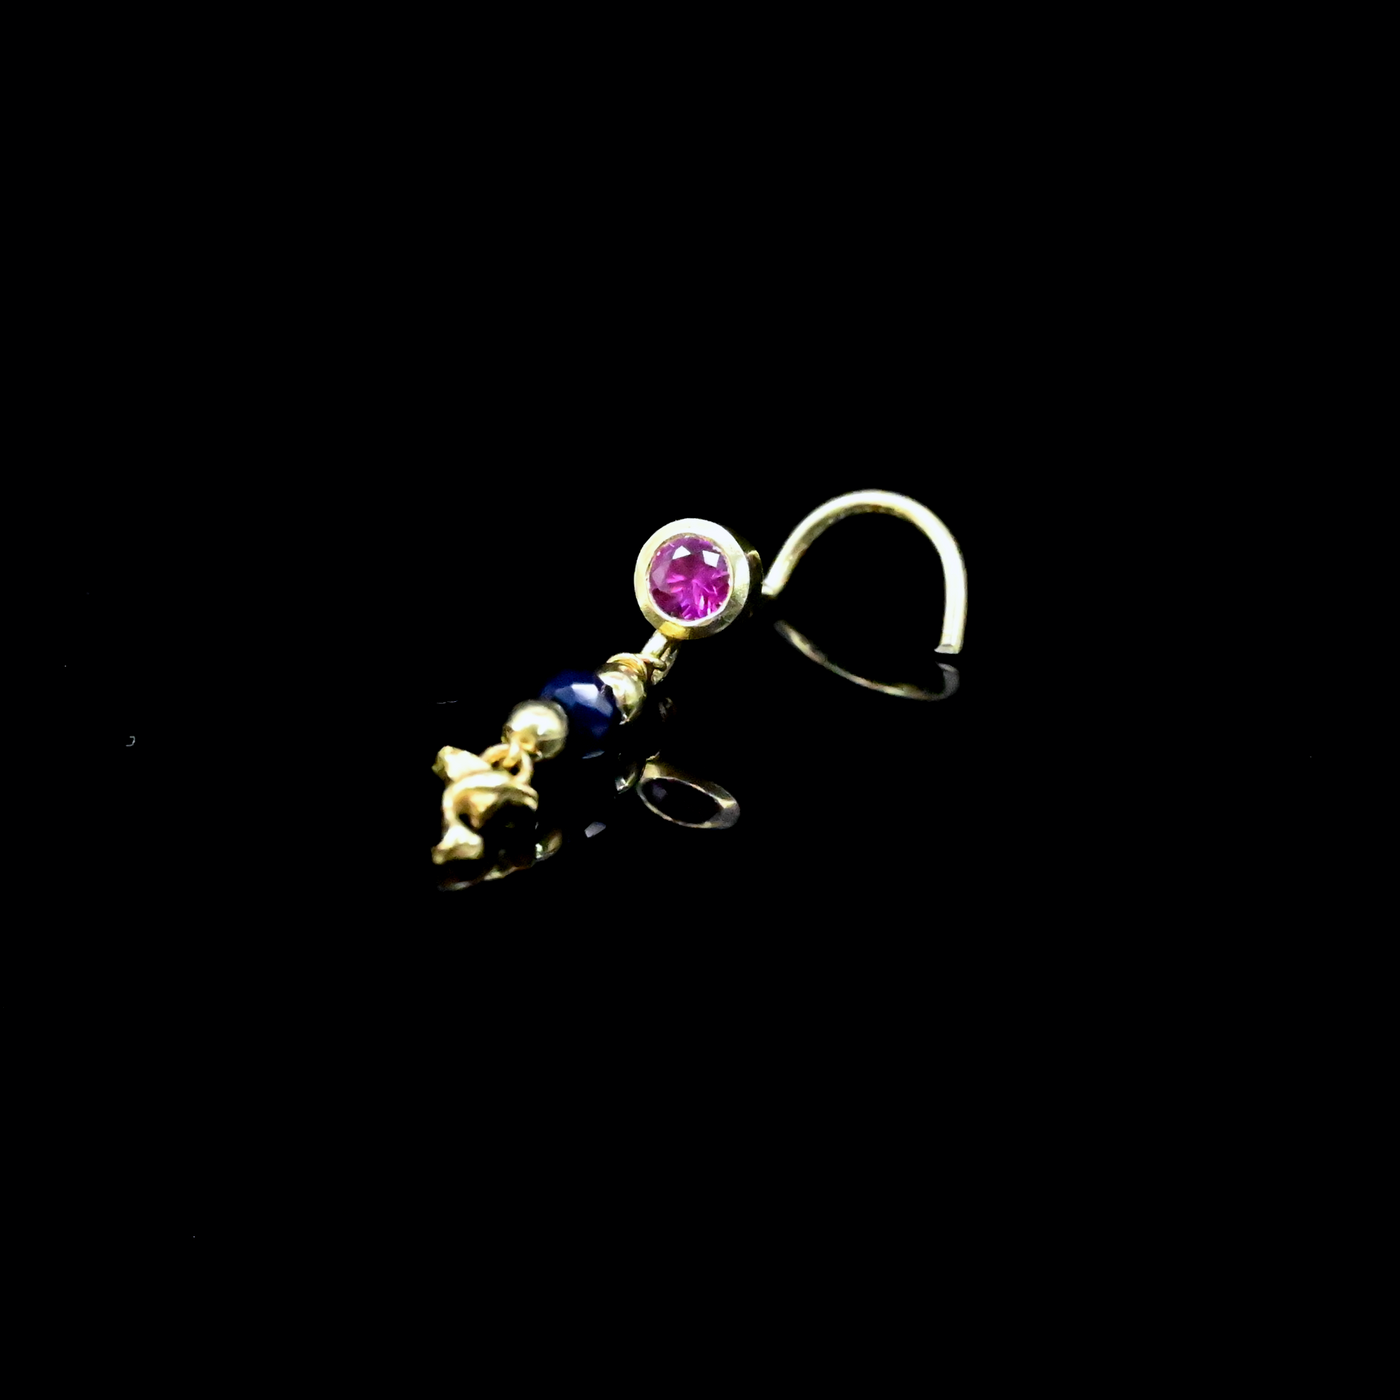 Gold Plated Dangling Fish Nose Stud